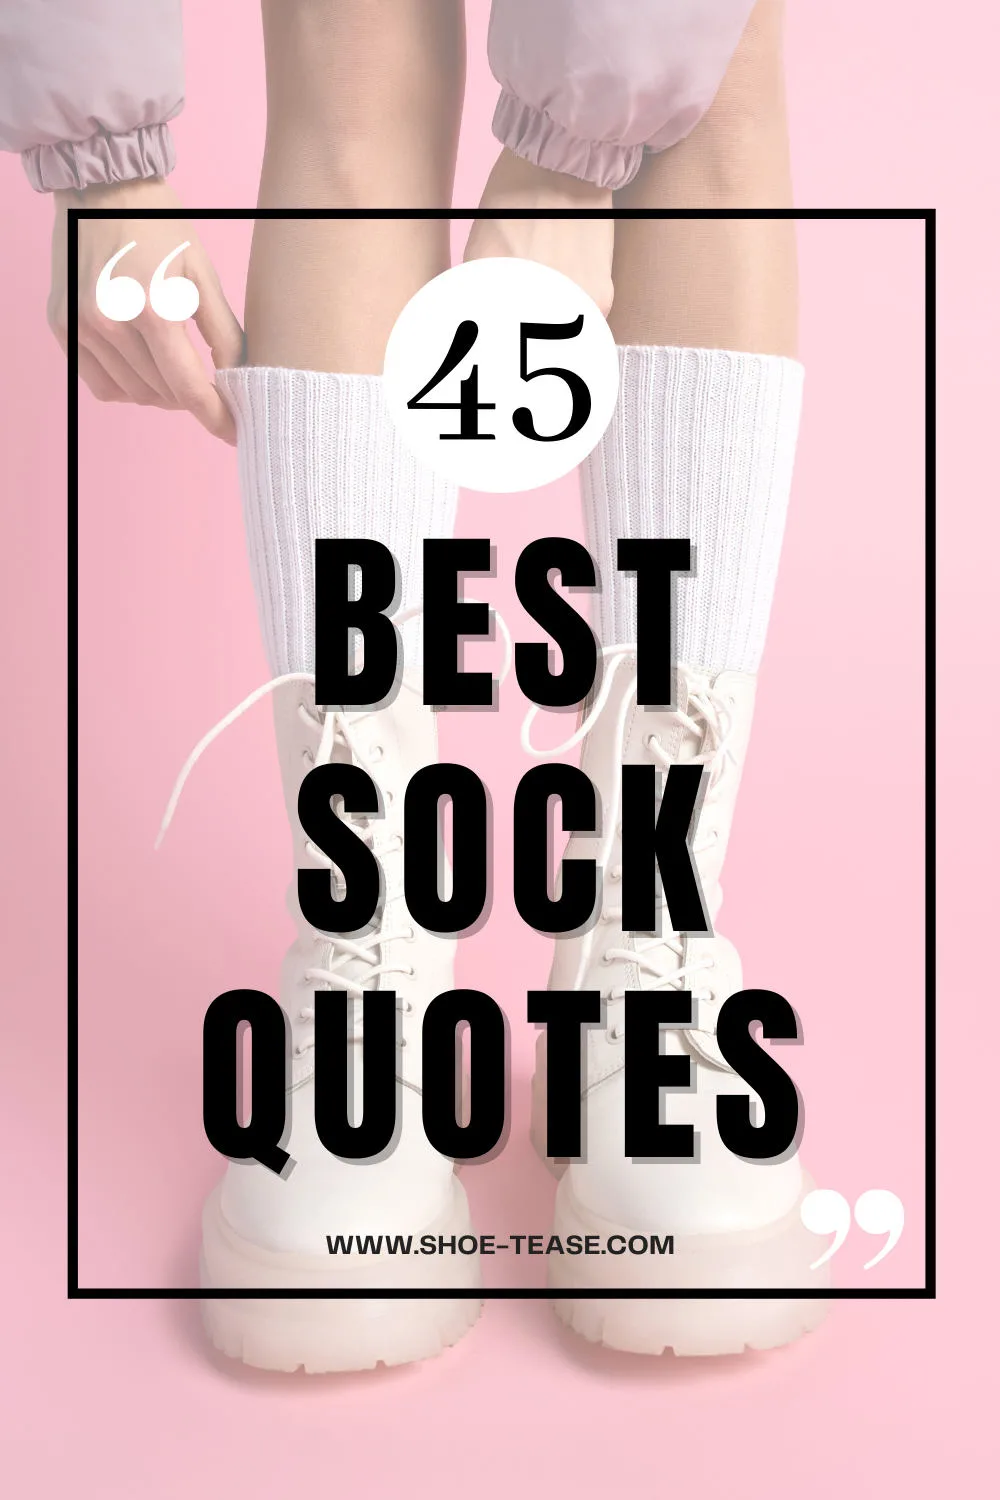 Text reading 45 best sock quotes shoe-tease.com over cropped image of pulling up white socks from beige combat boots.